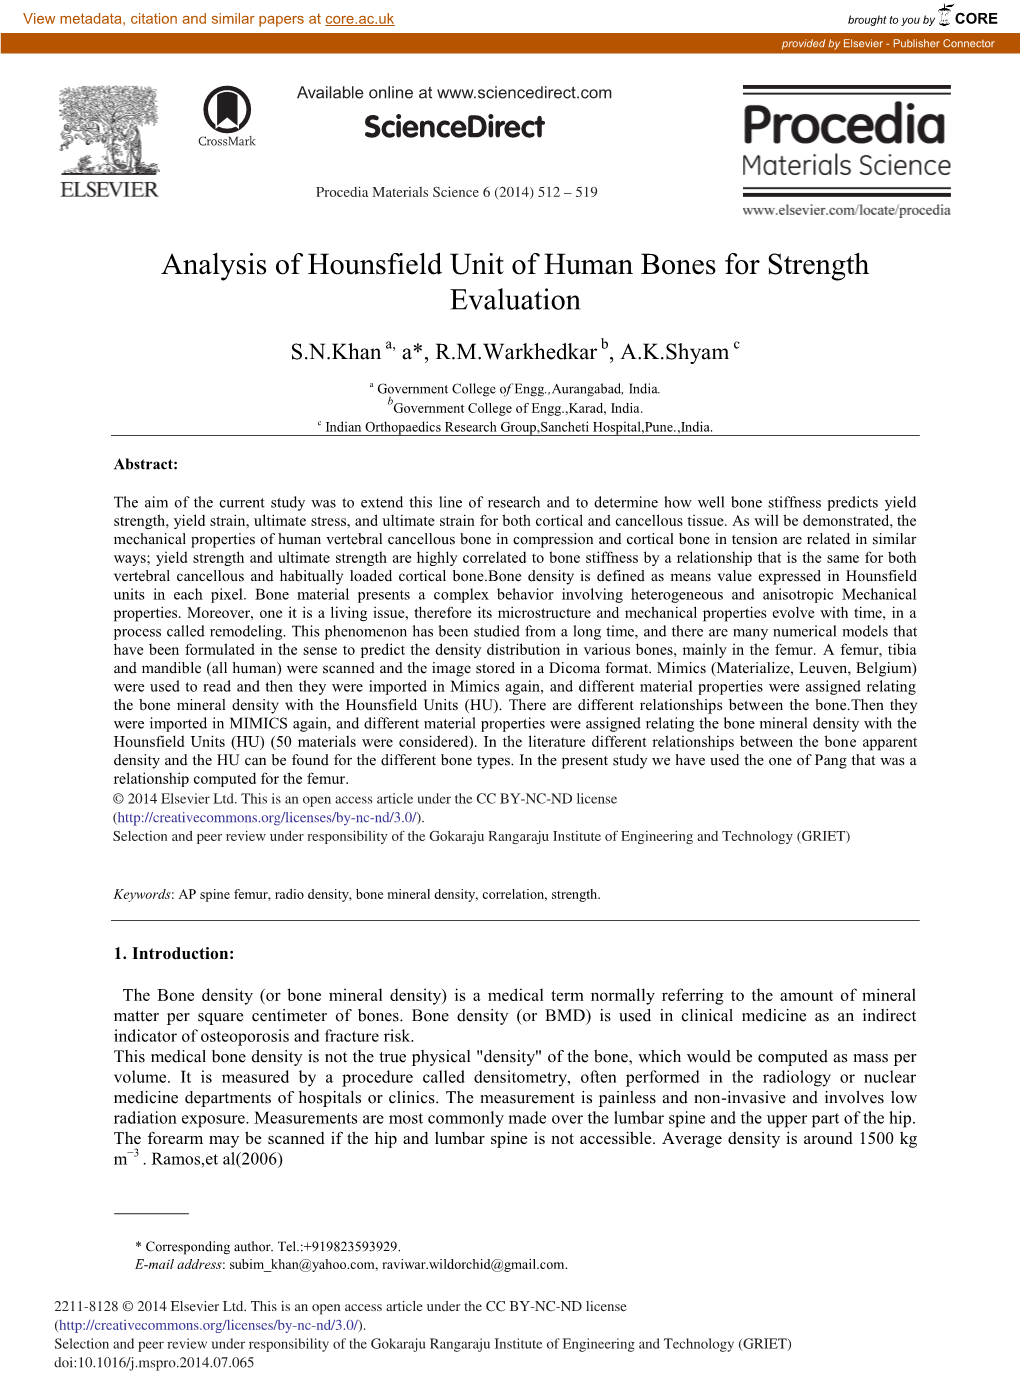 Analysis of Hounsfield Unit of Human Bones for Strength Evaluation